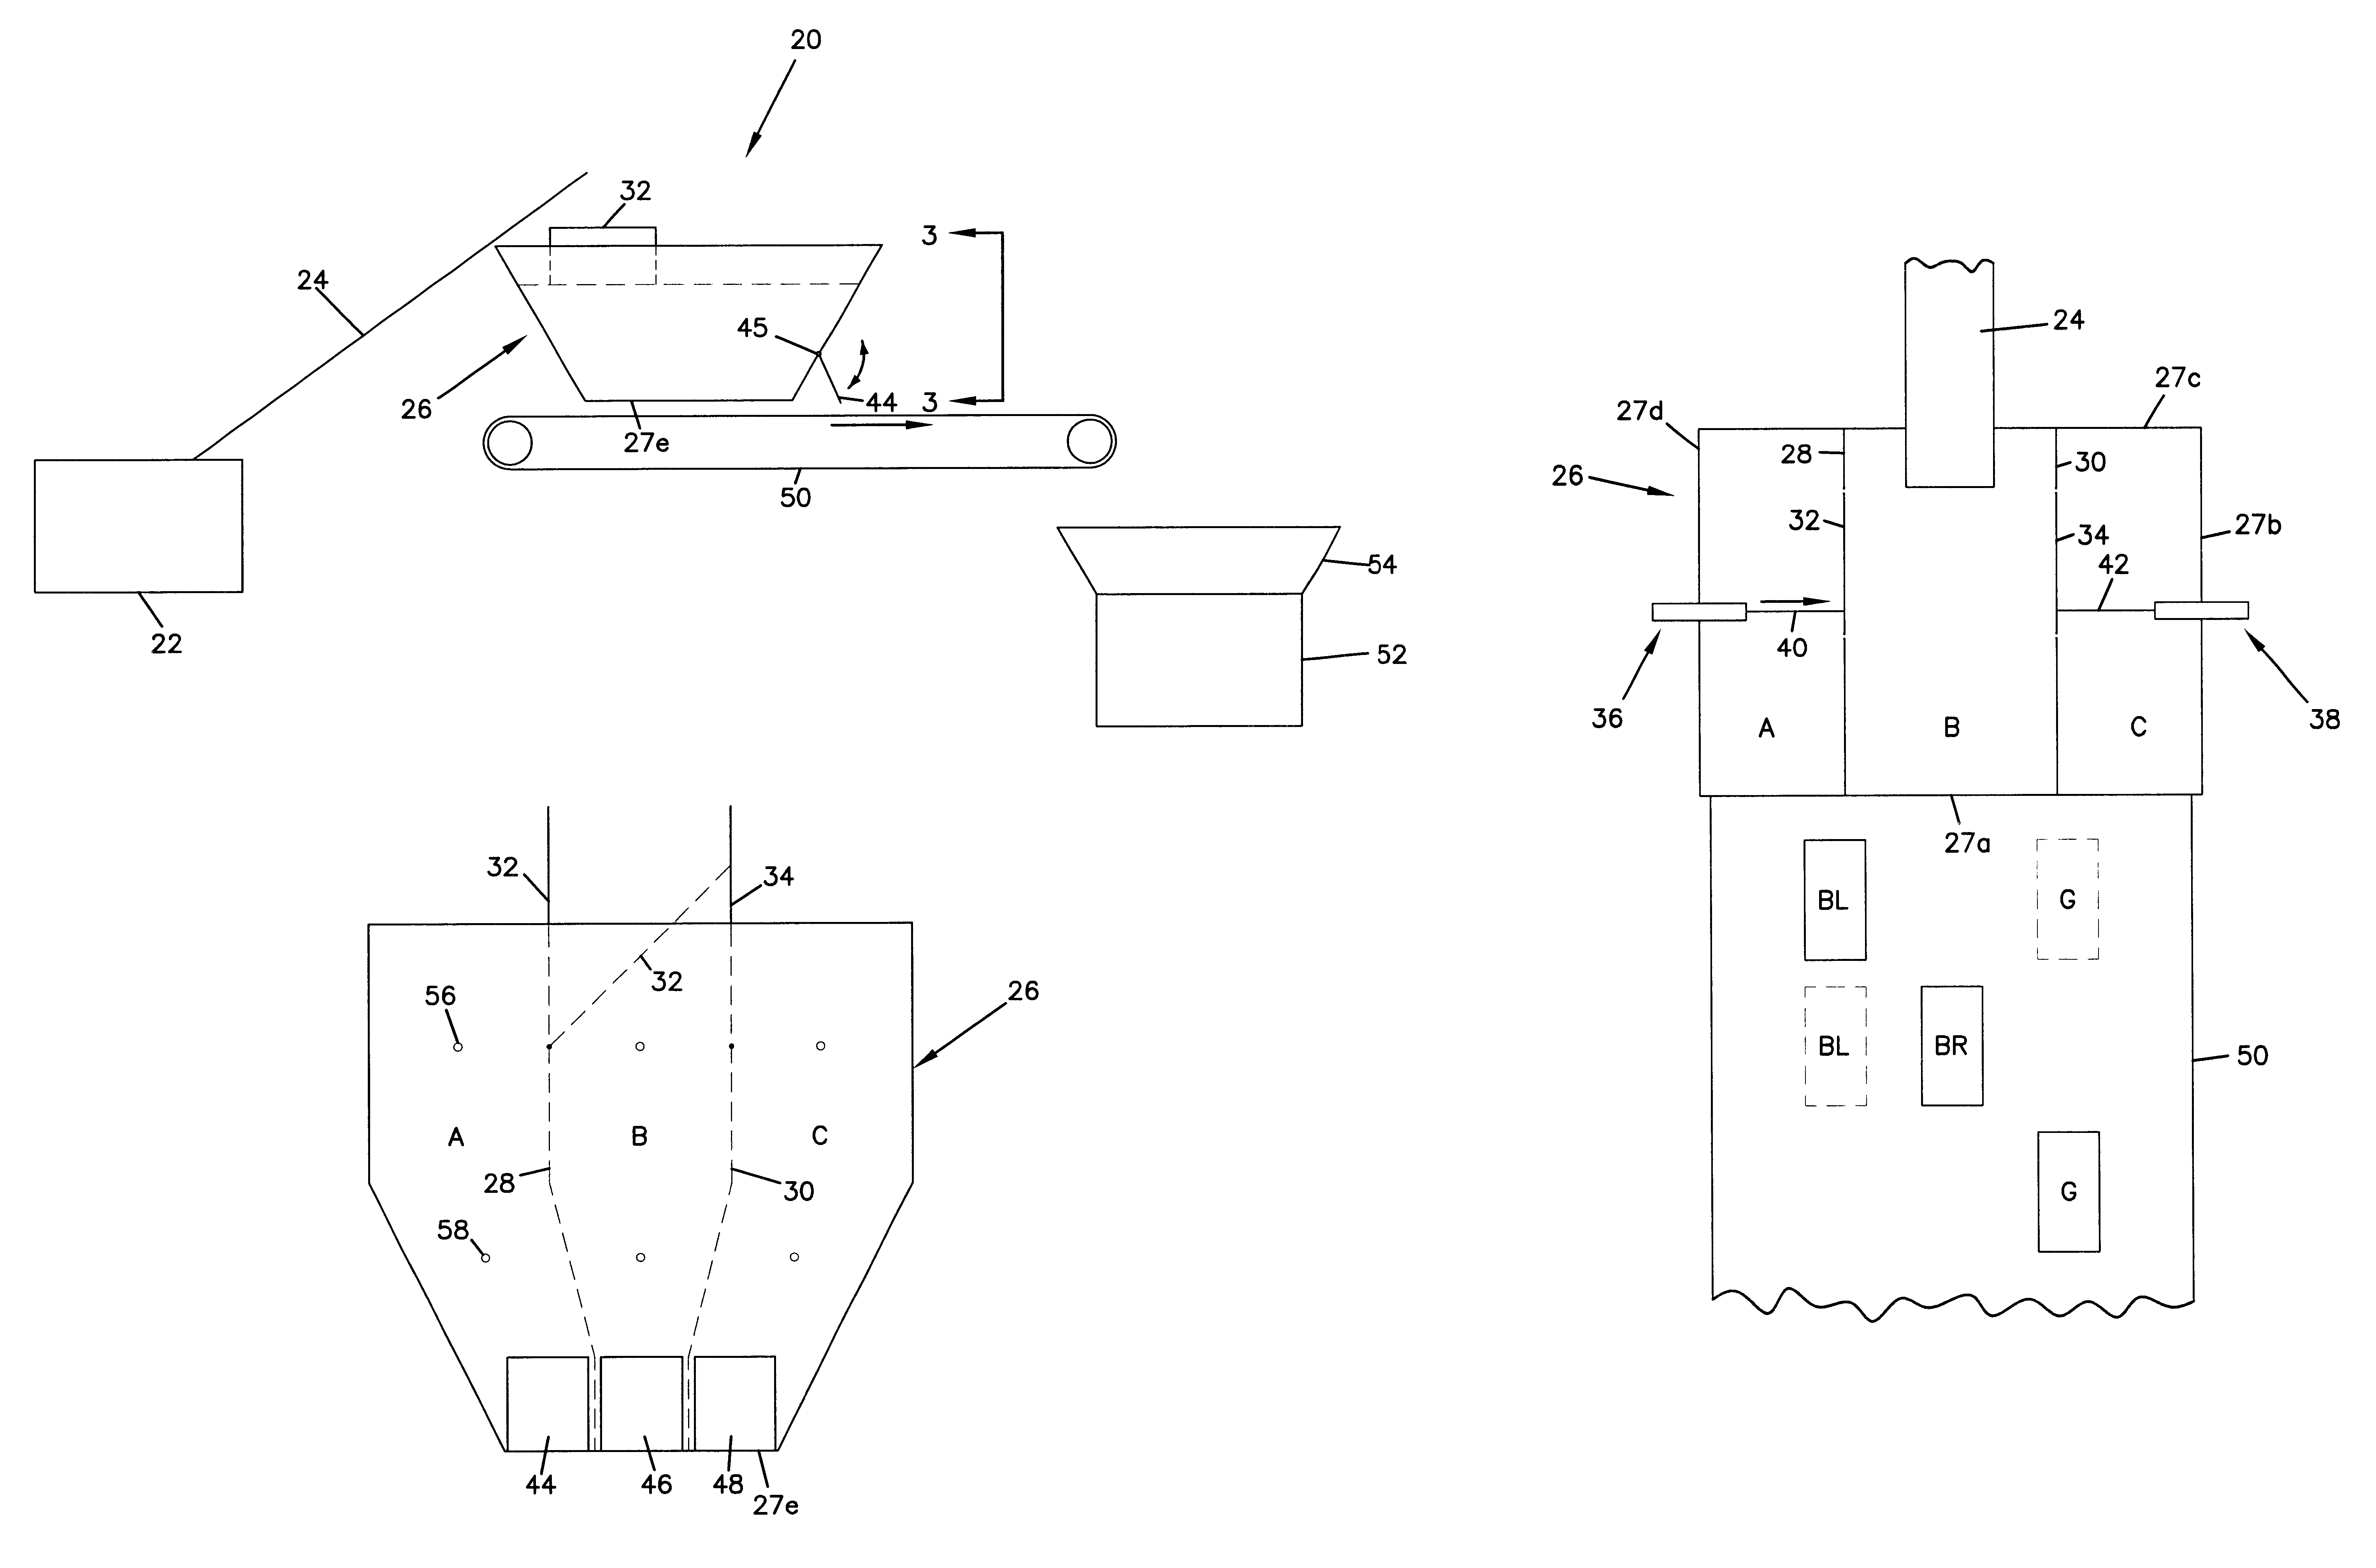 Process and equipment for producing concrete products having blended colors